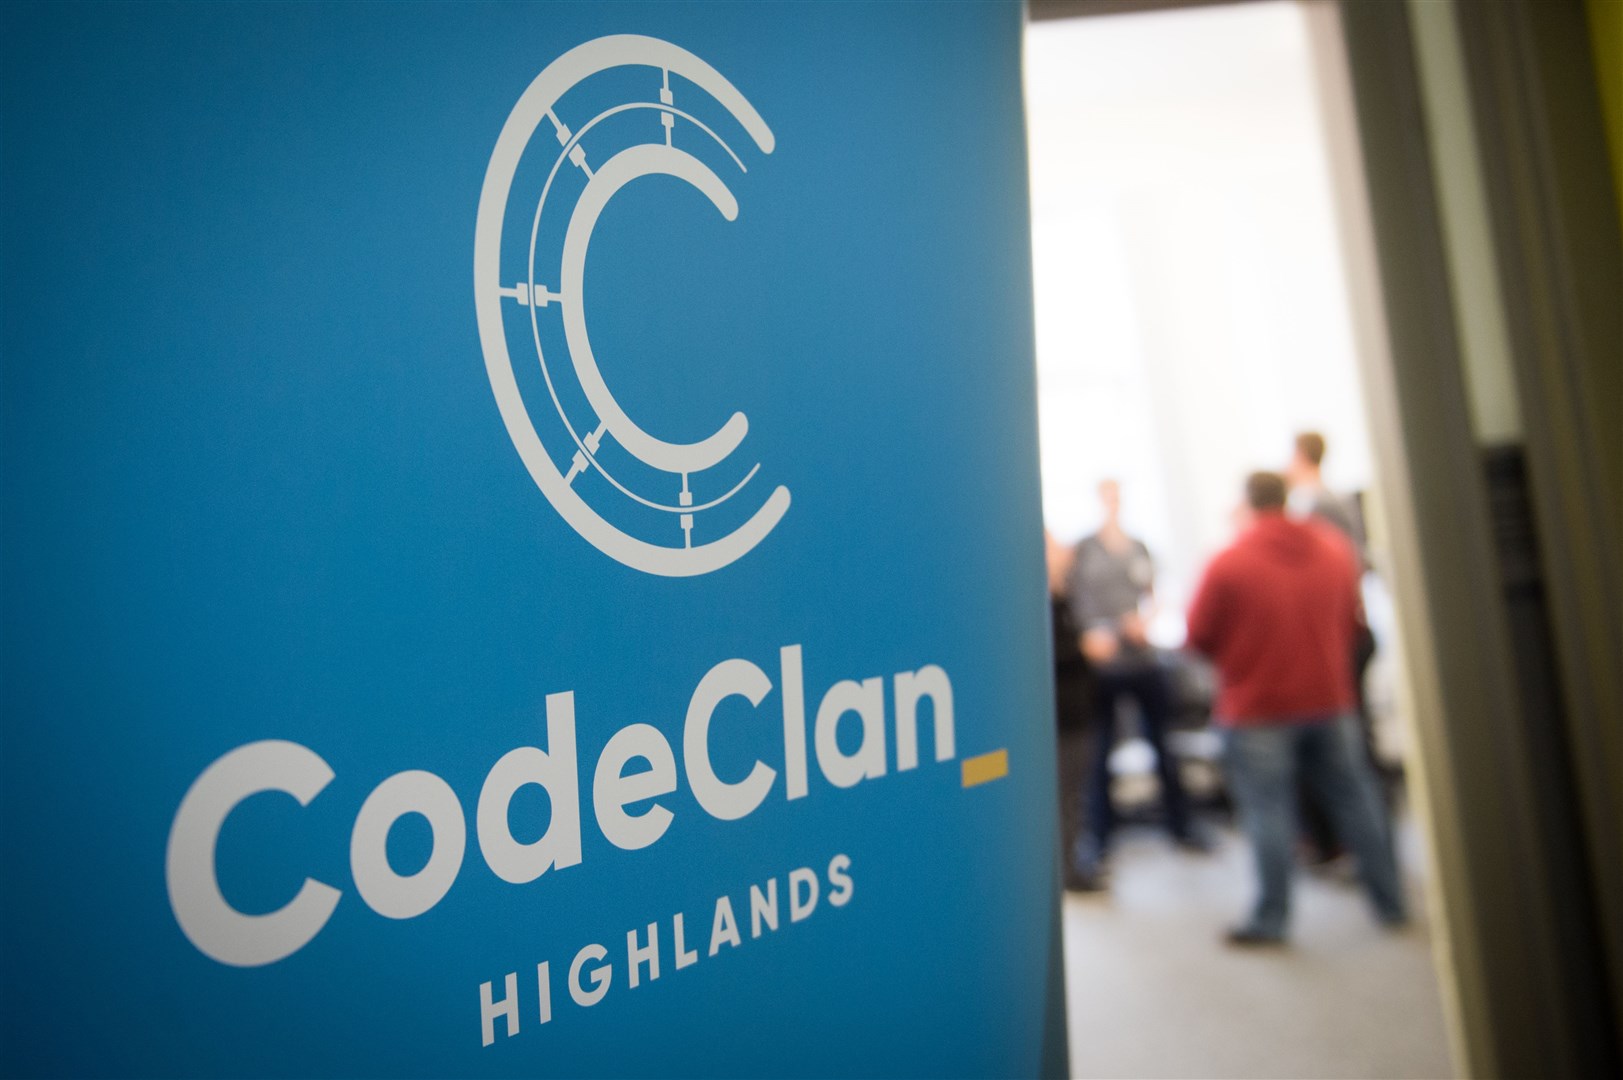 launch of the CodeClan Highlands coding academy at Inverness Creative Academy/Wasps Studios, Midmills Campus, Inverness....Picture: Callum Mackay. Image No. 043734.